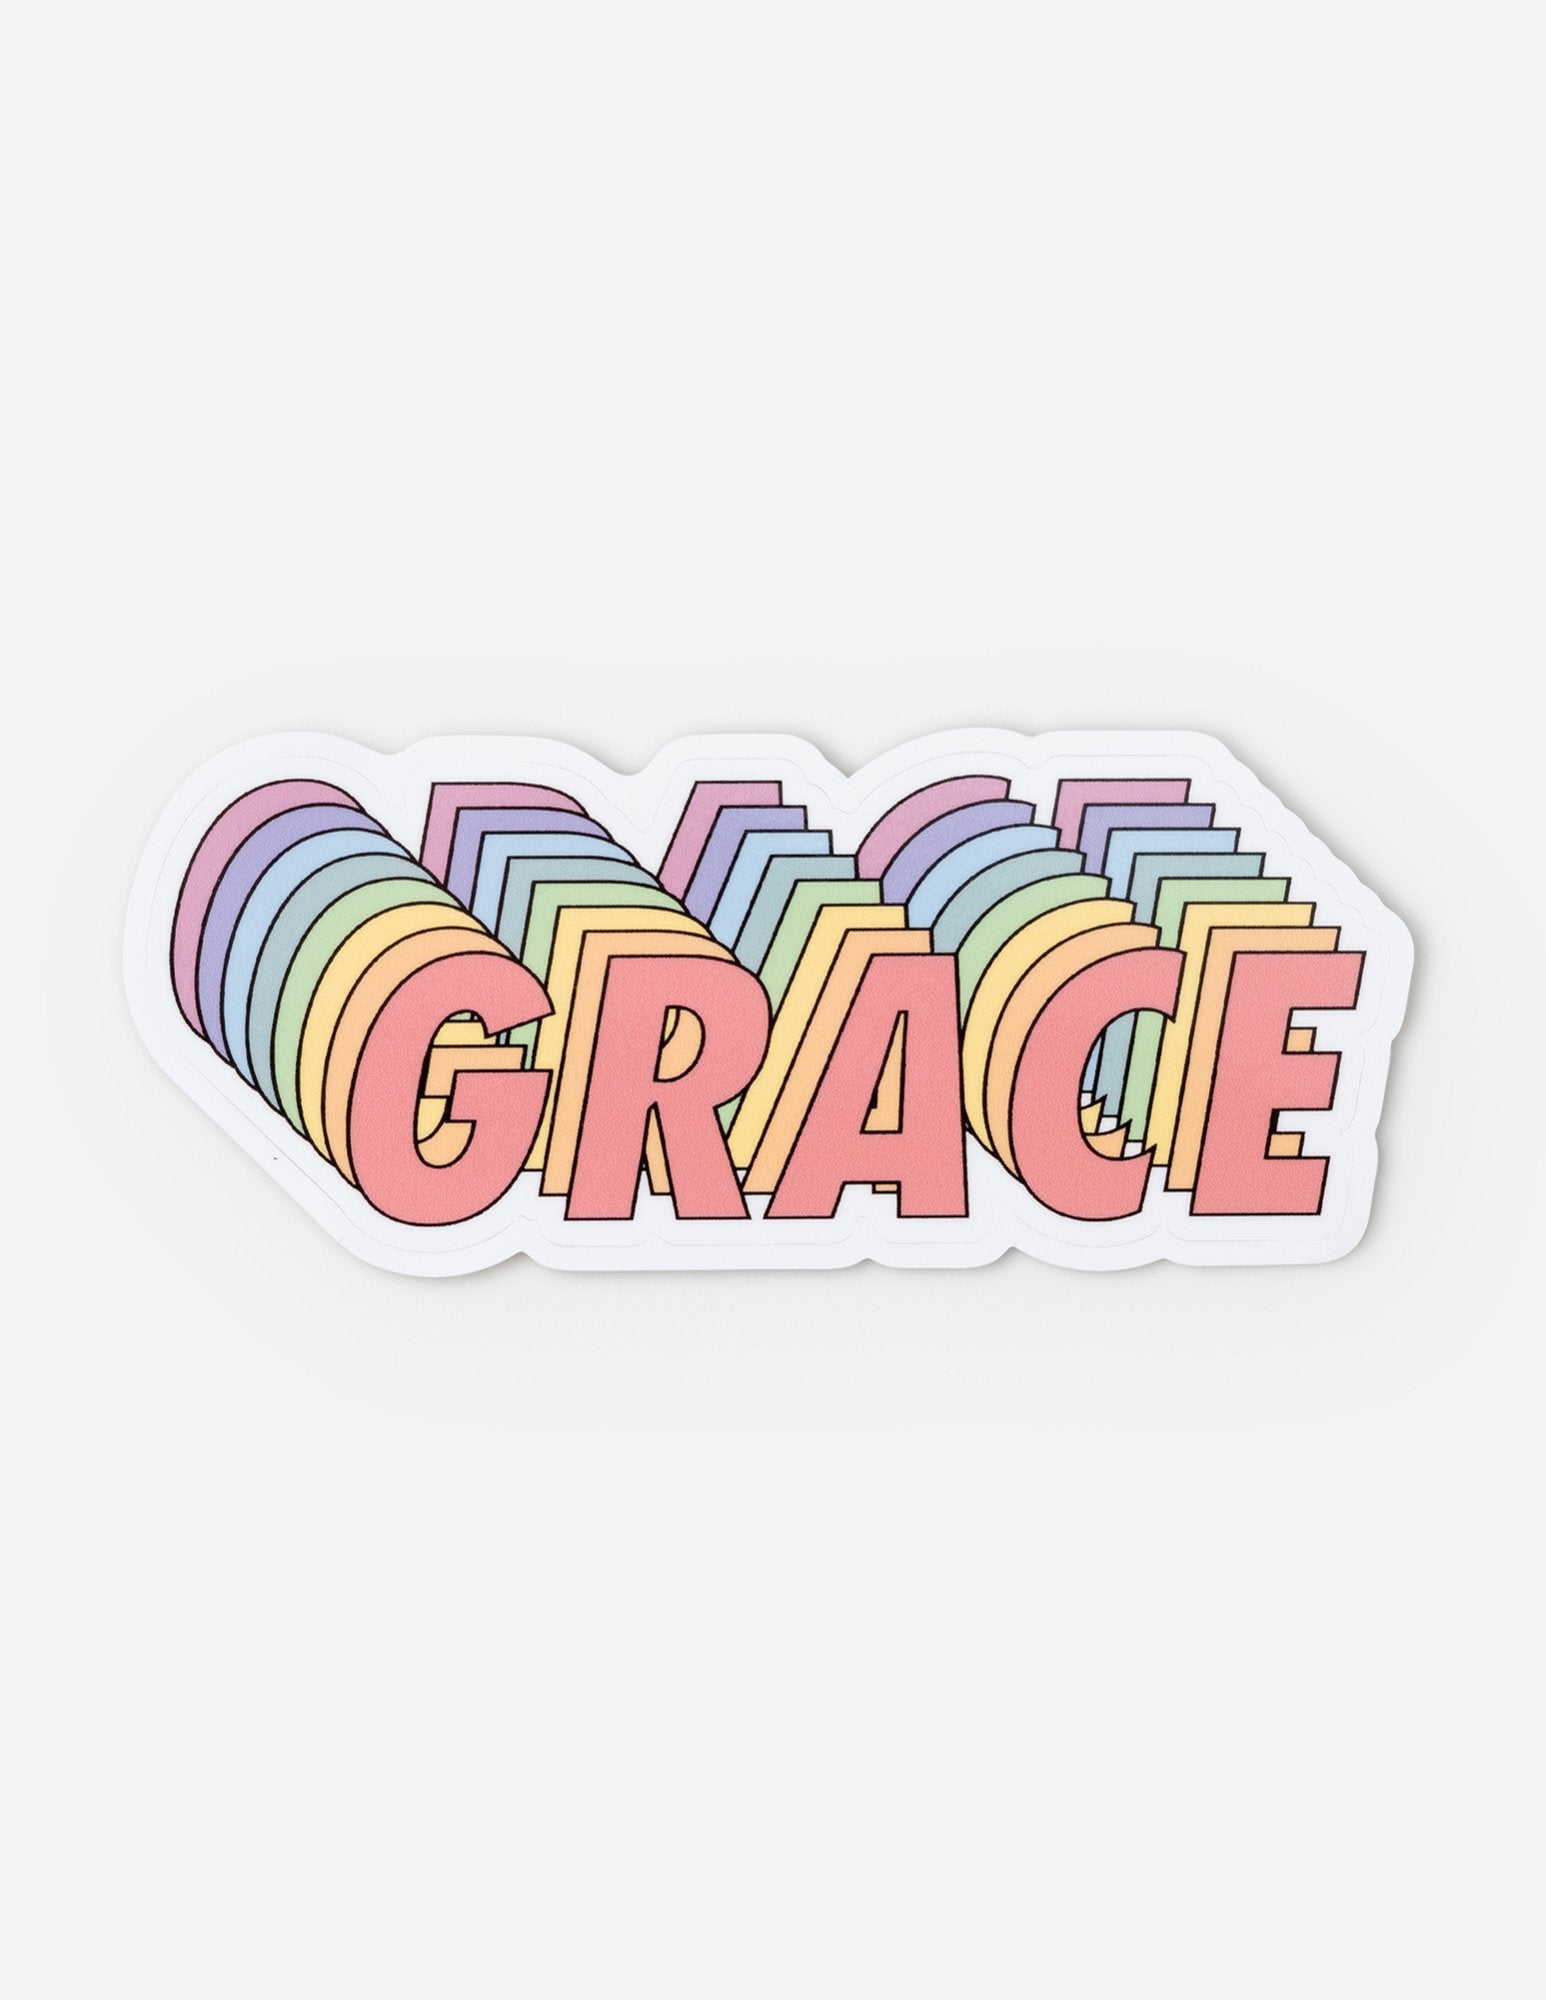 Elly and Grace Monthly Christian Sticker Club